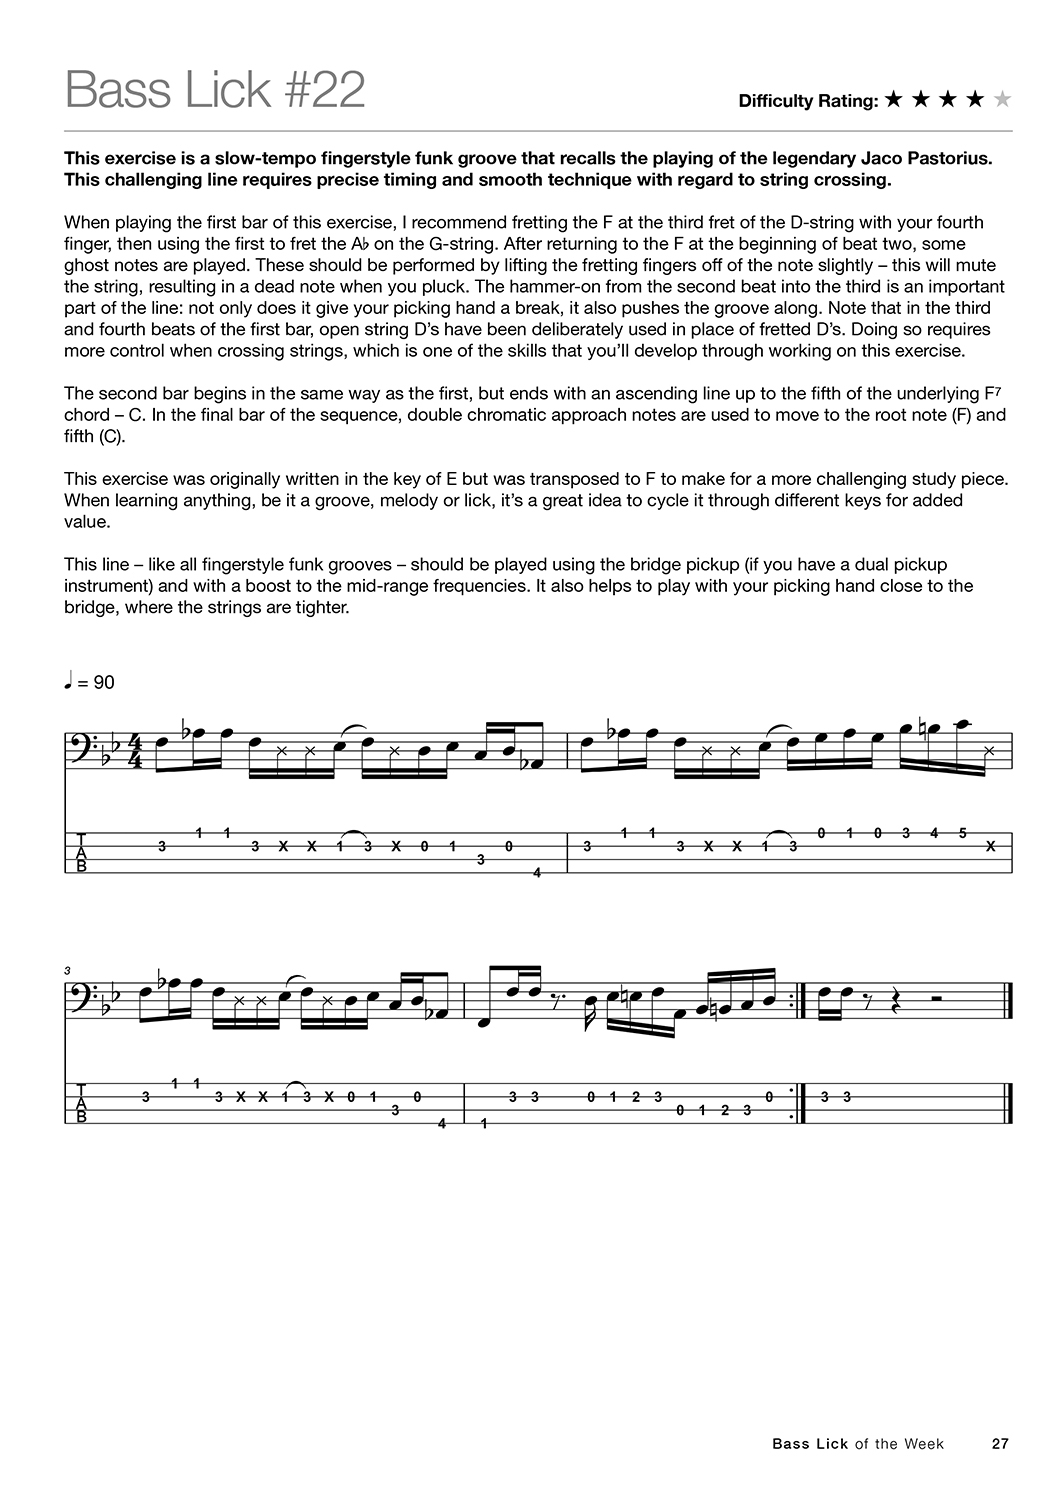 Sample page from Bass Lick of the Week